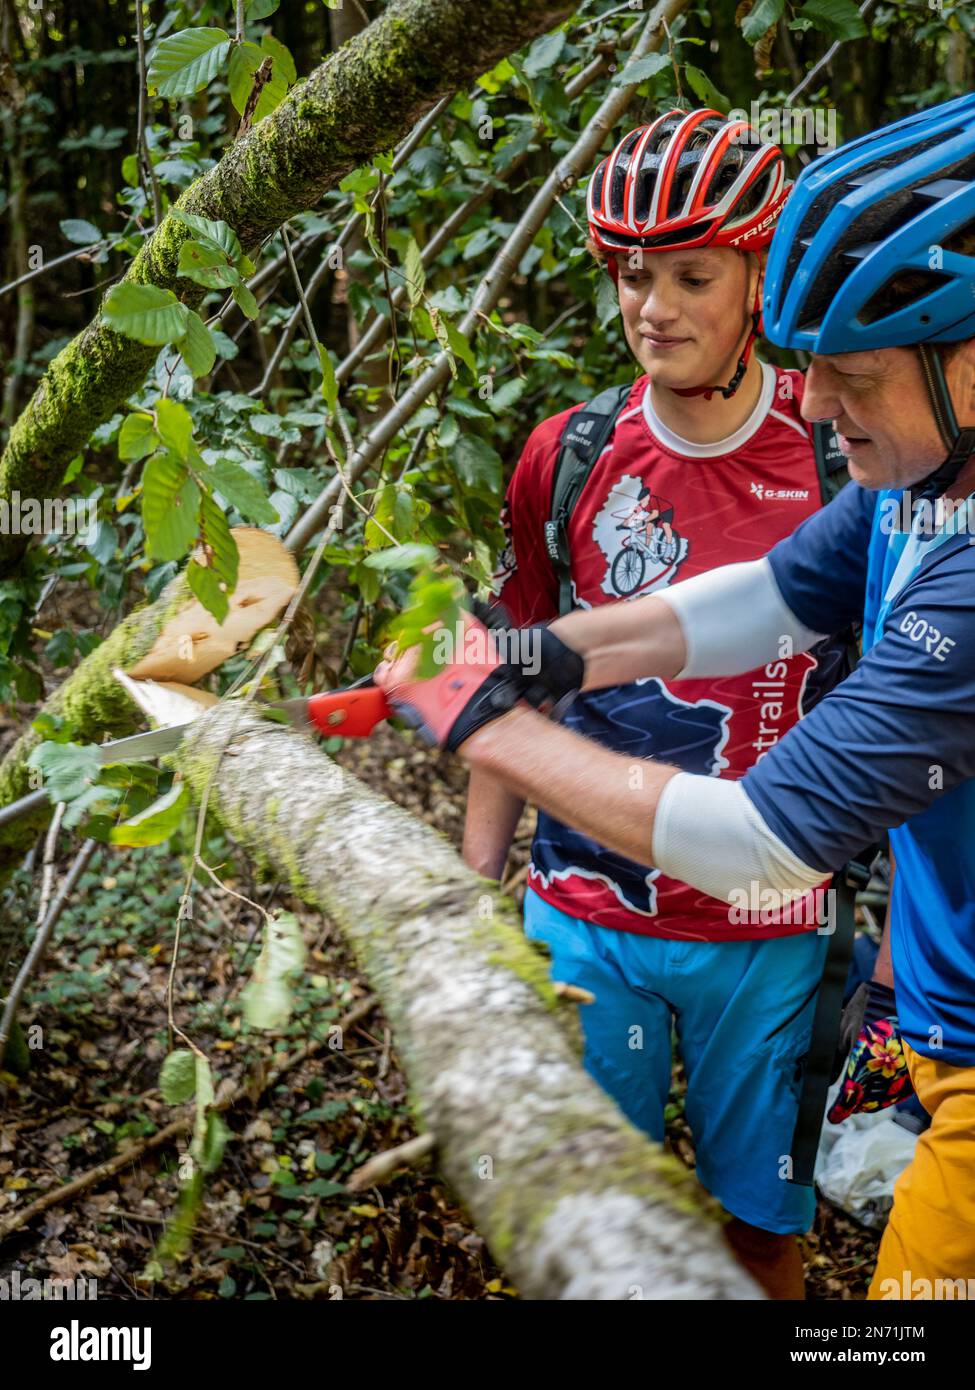 E-mountain biker in the Grengewald (Grünewald) near Luxembourg City removing a tree that fell across the path. Stock Photo